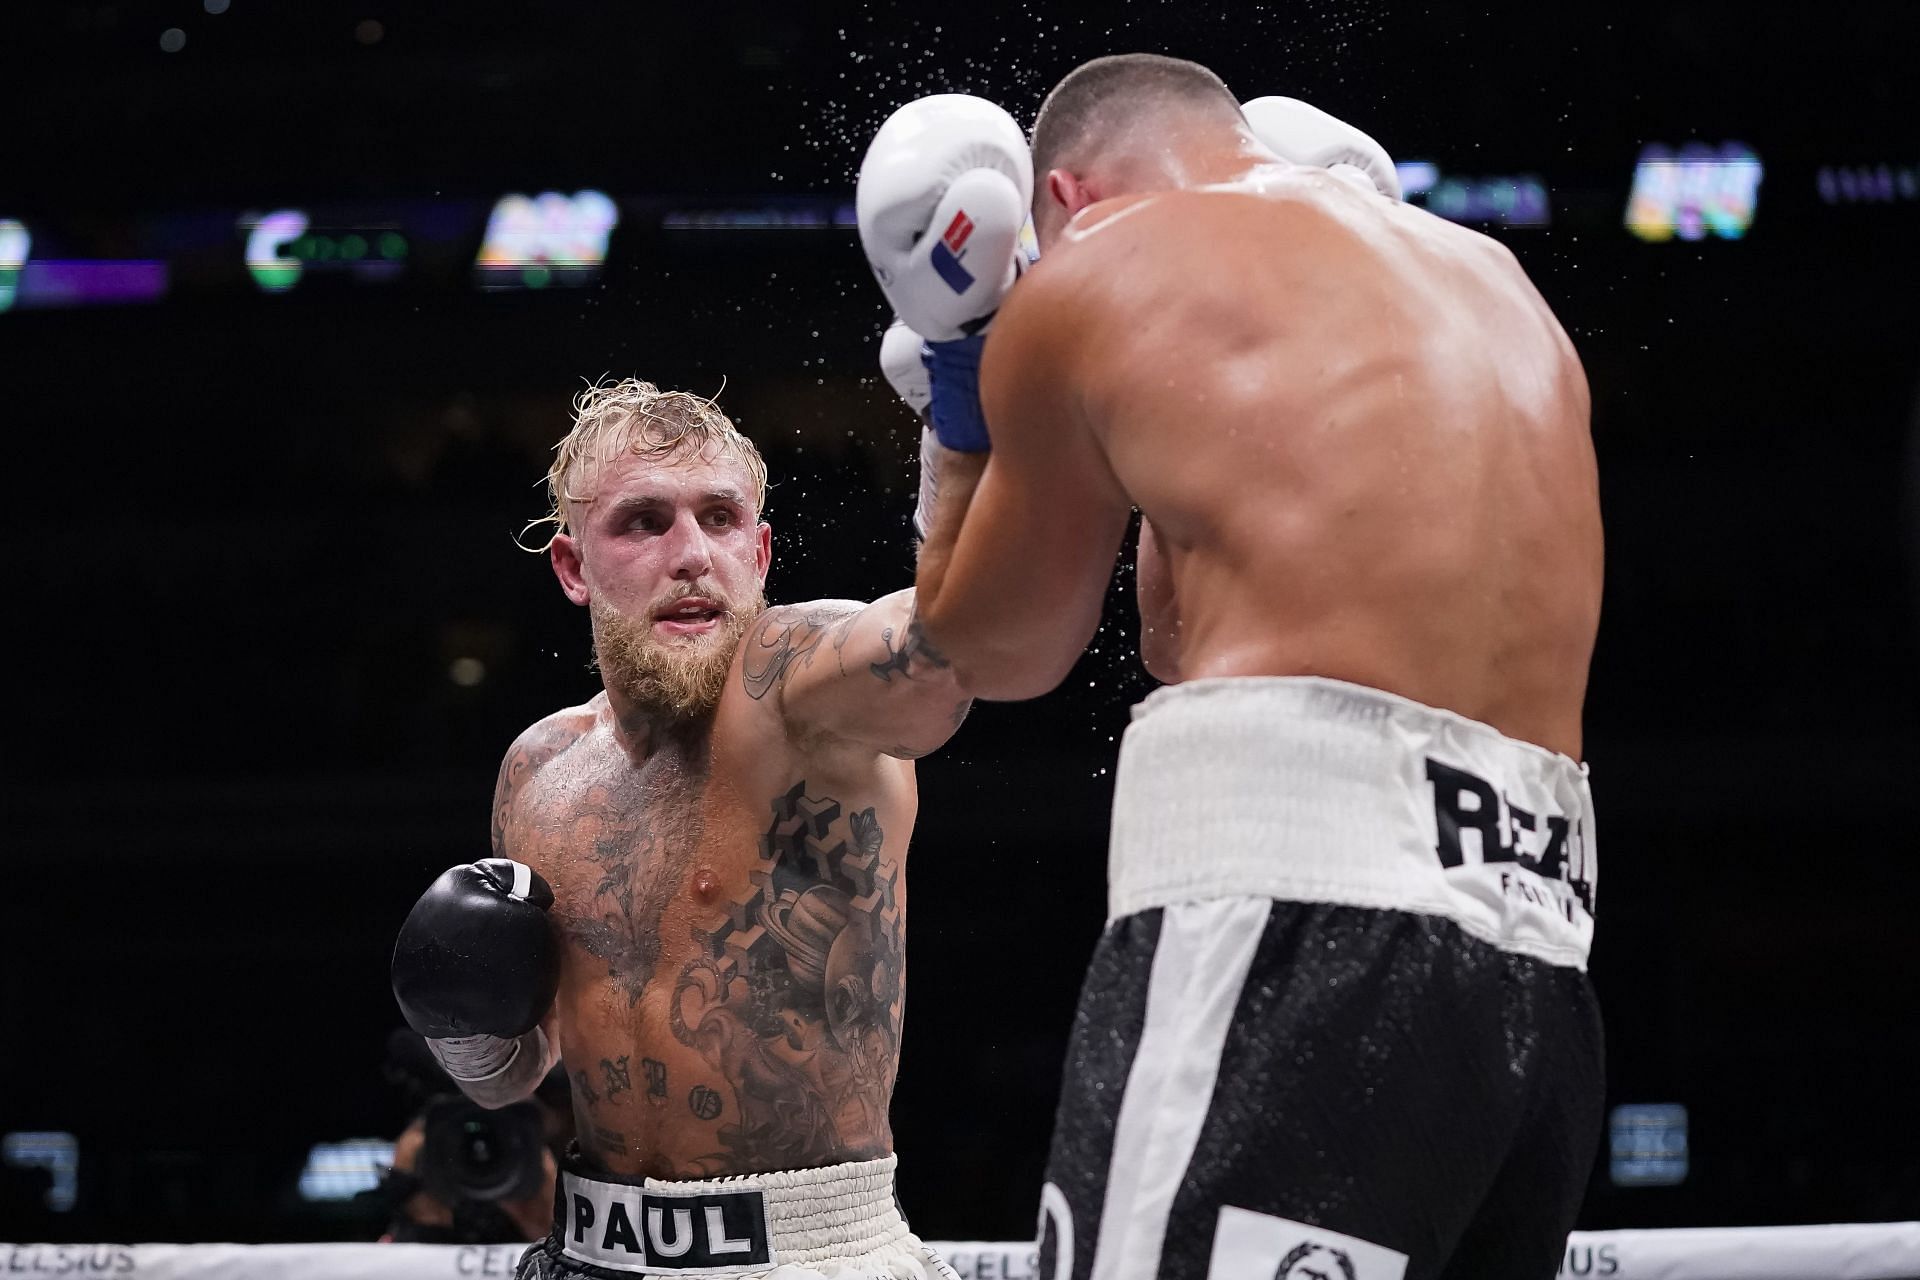 Jake Paul has plenty of experience in the boxing ring at this point